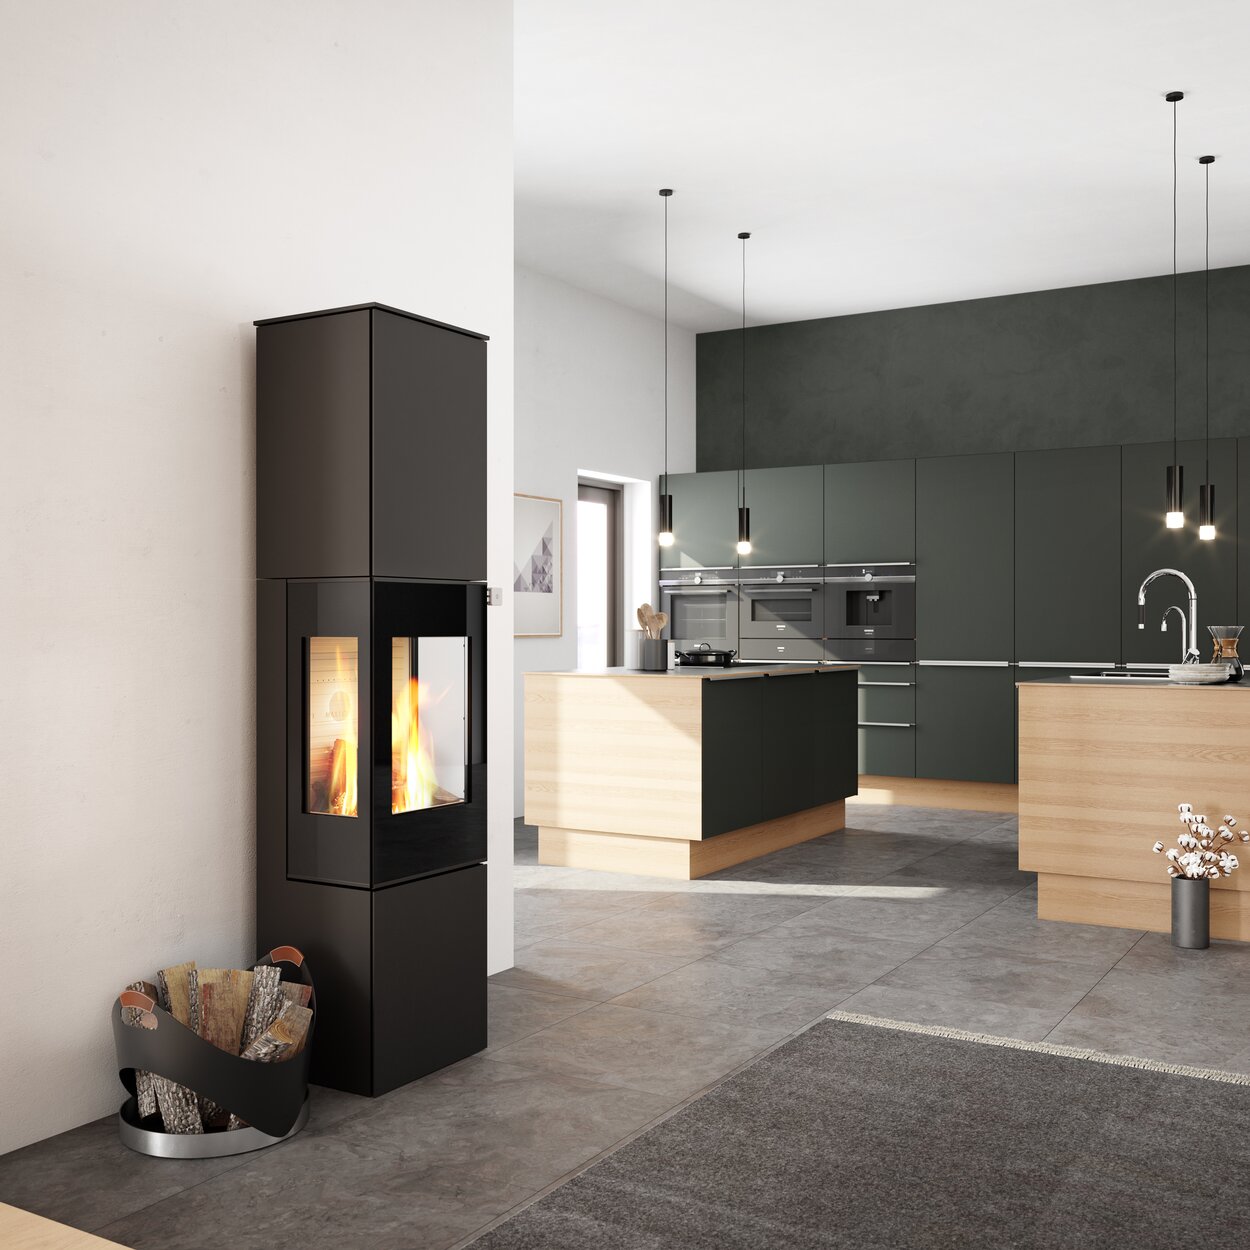 Wood stove NEXO 185 in black with glass door and two side windows in the centre of the kitchen and living room